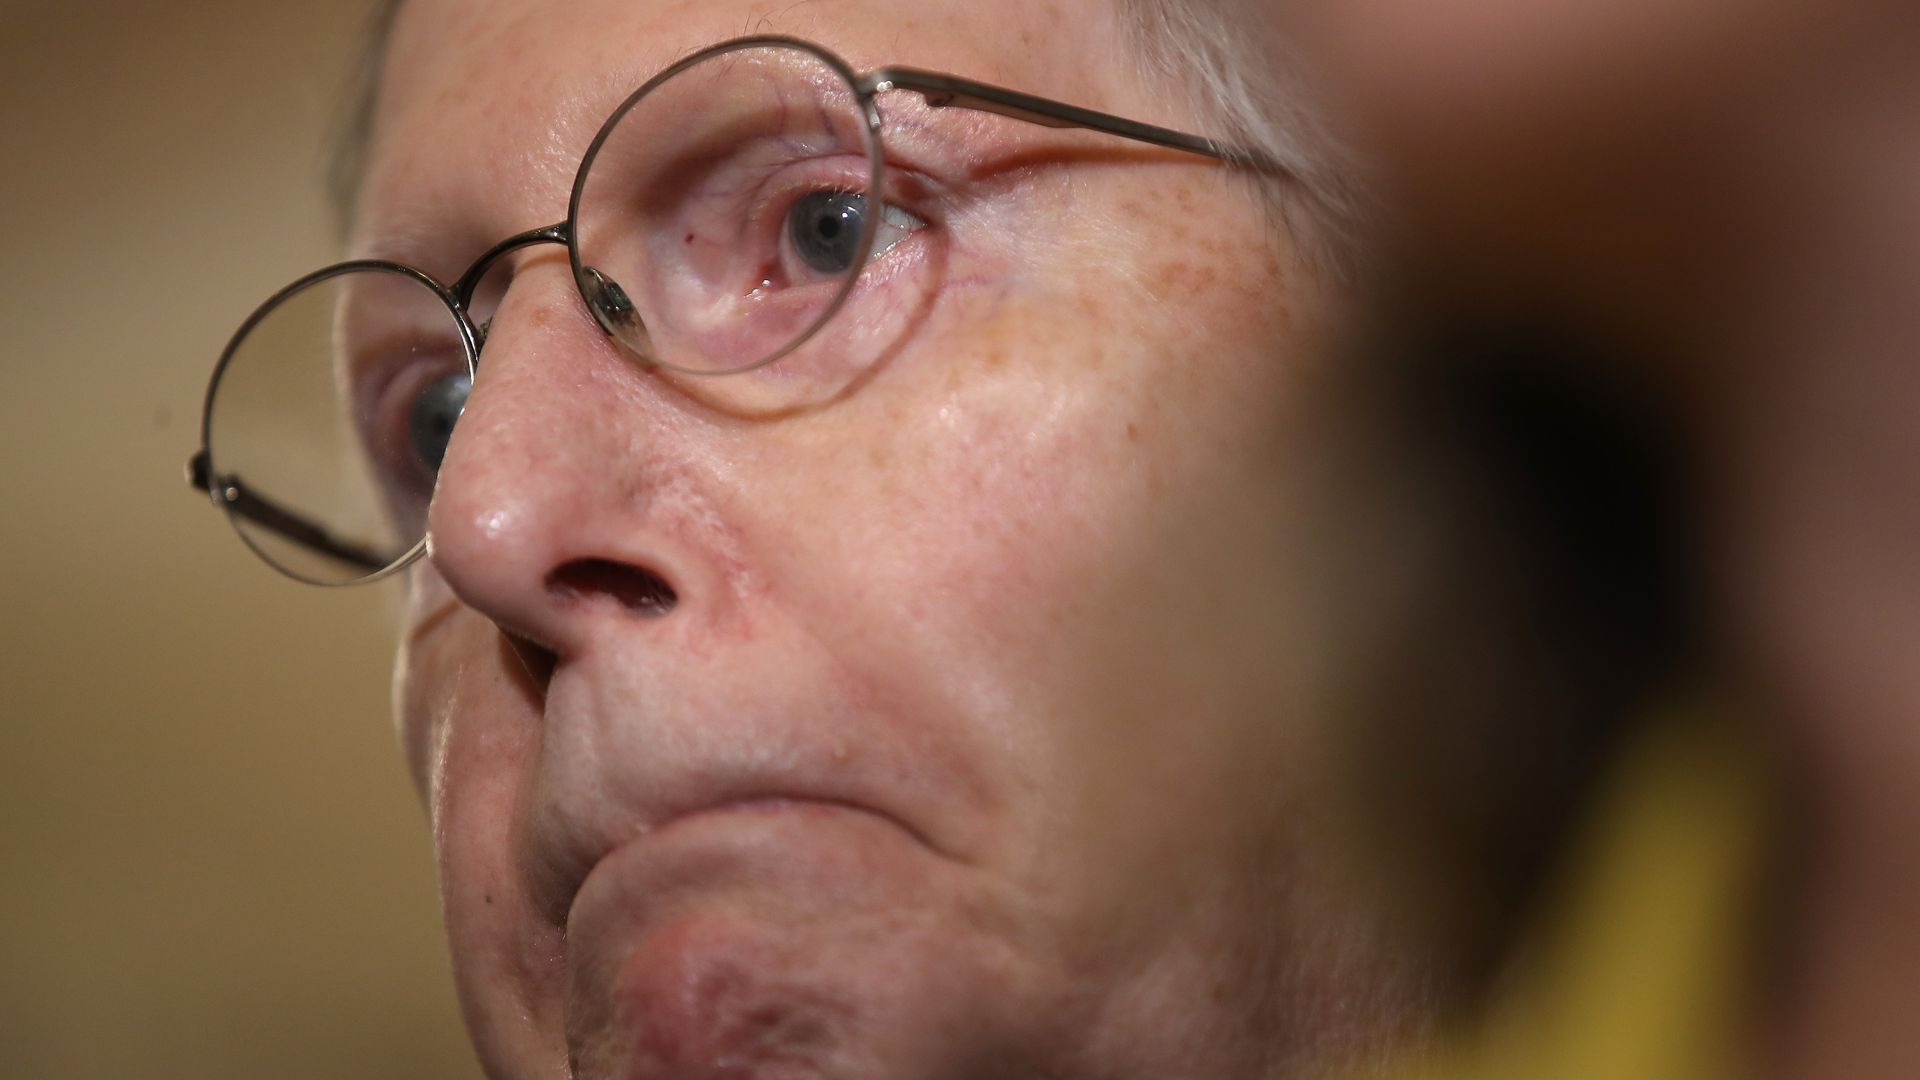 this image is a close up of Mitch McConnell's face